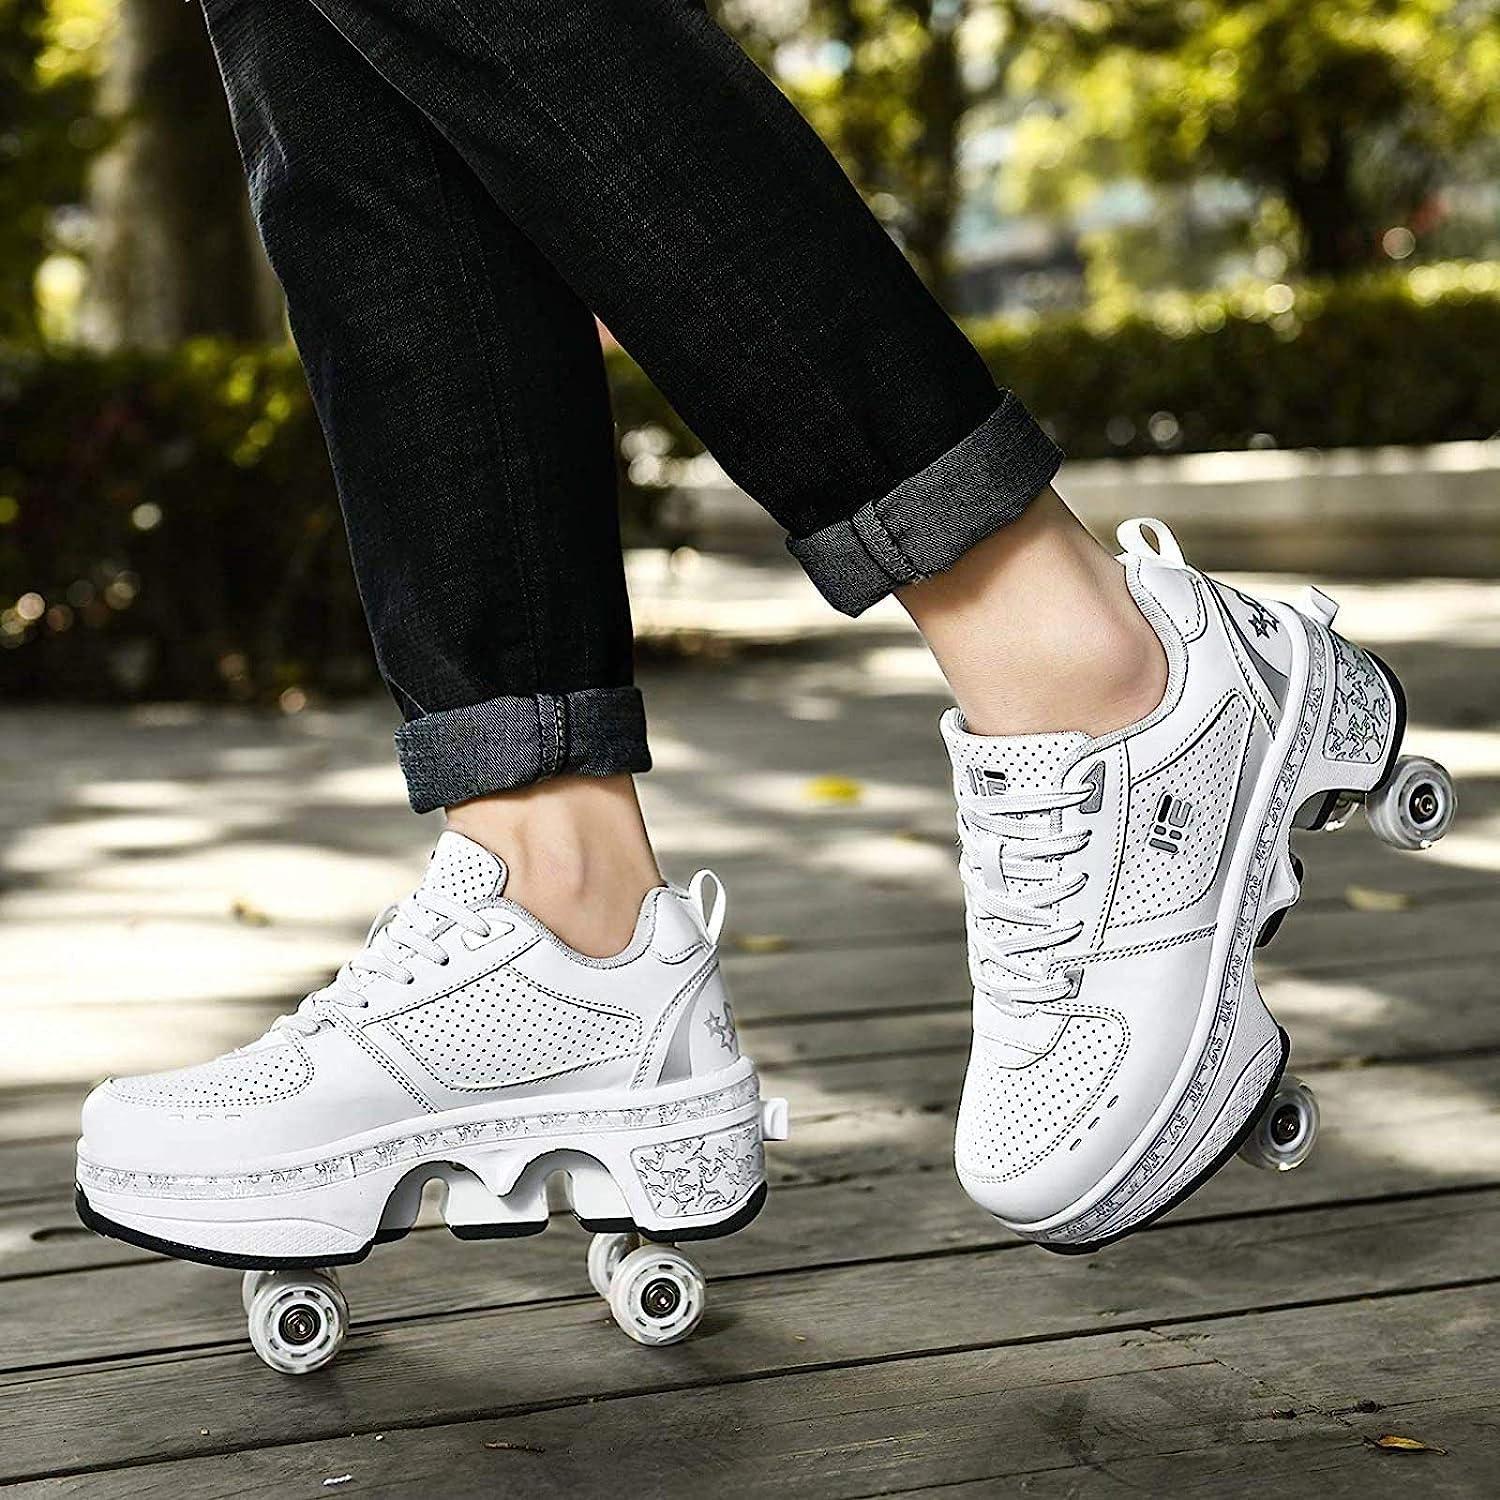 Roller Skates for Women Outdoor,Parkour Shoes with Wheels for  Girls/Boys,Kick Rollers Shoes Retractable Adults/Kids,Quad Roller Skates  Men,Unisex Skating Shoes Recreation Sneakers Silver 8.5US